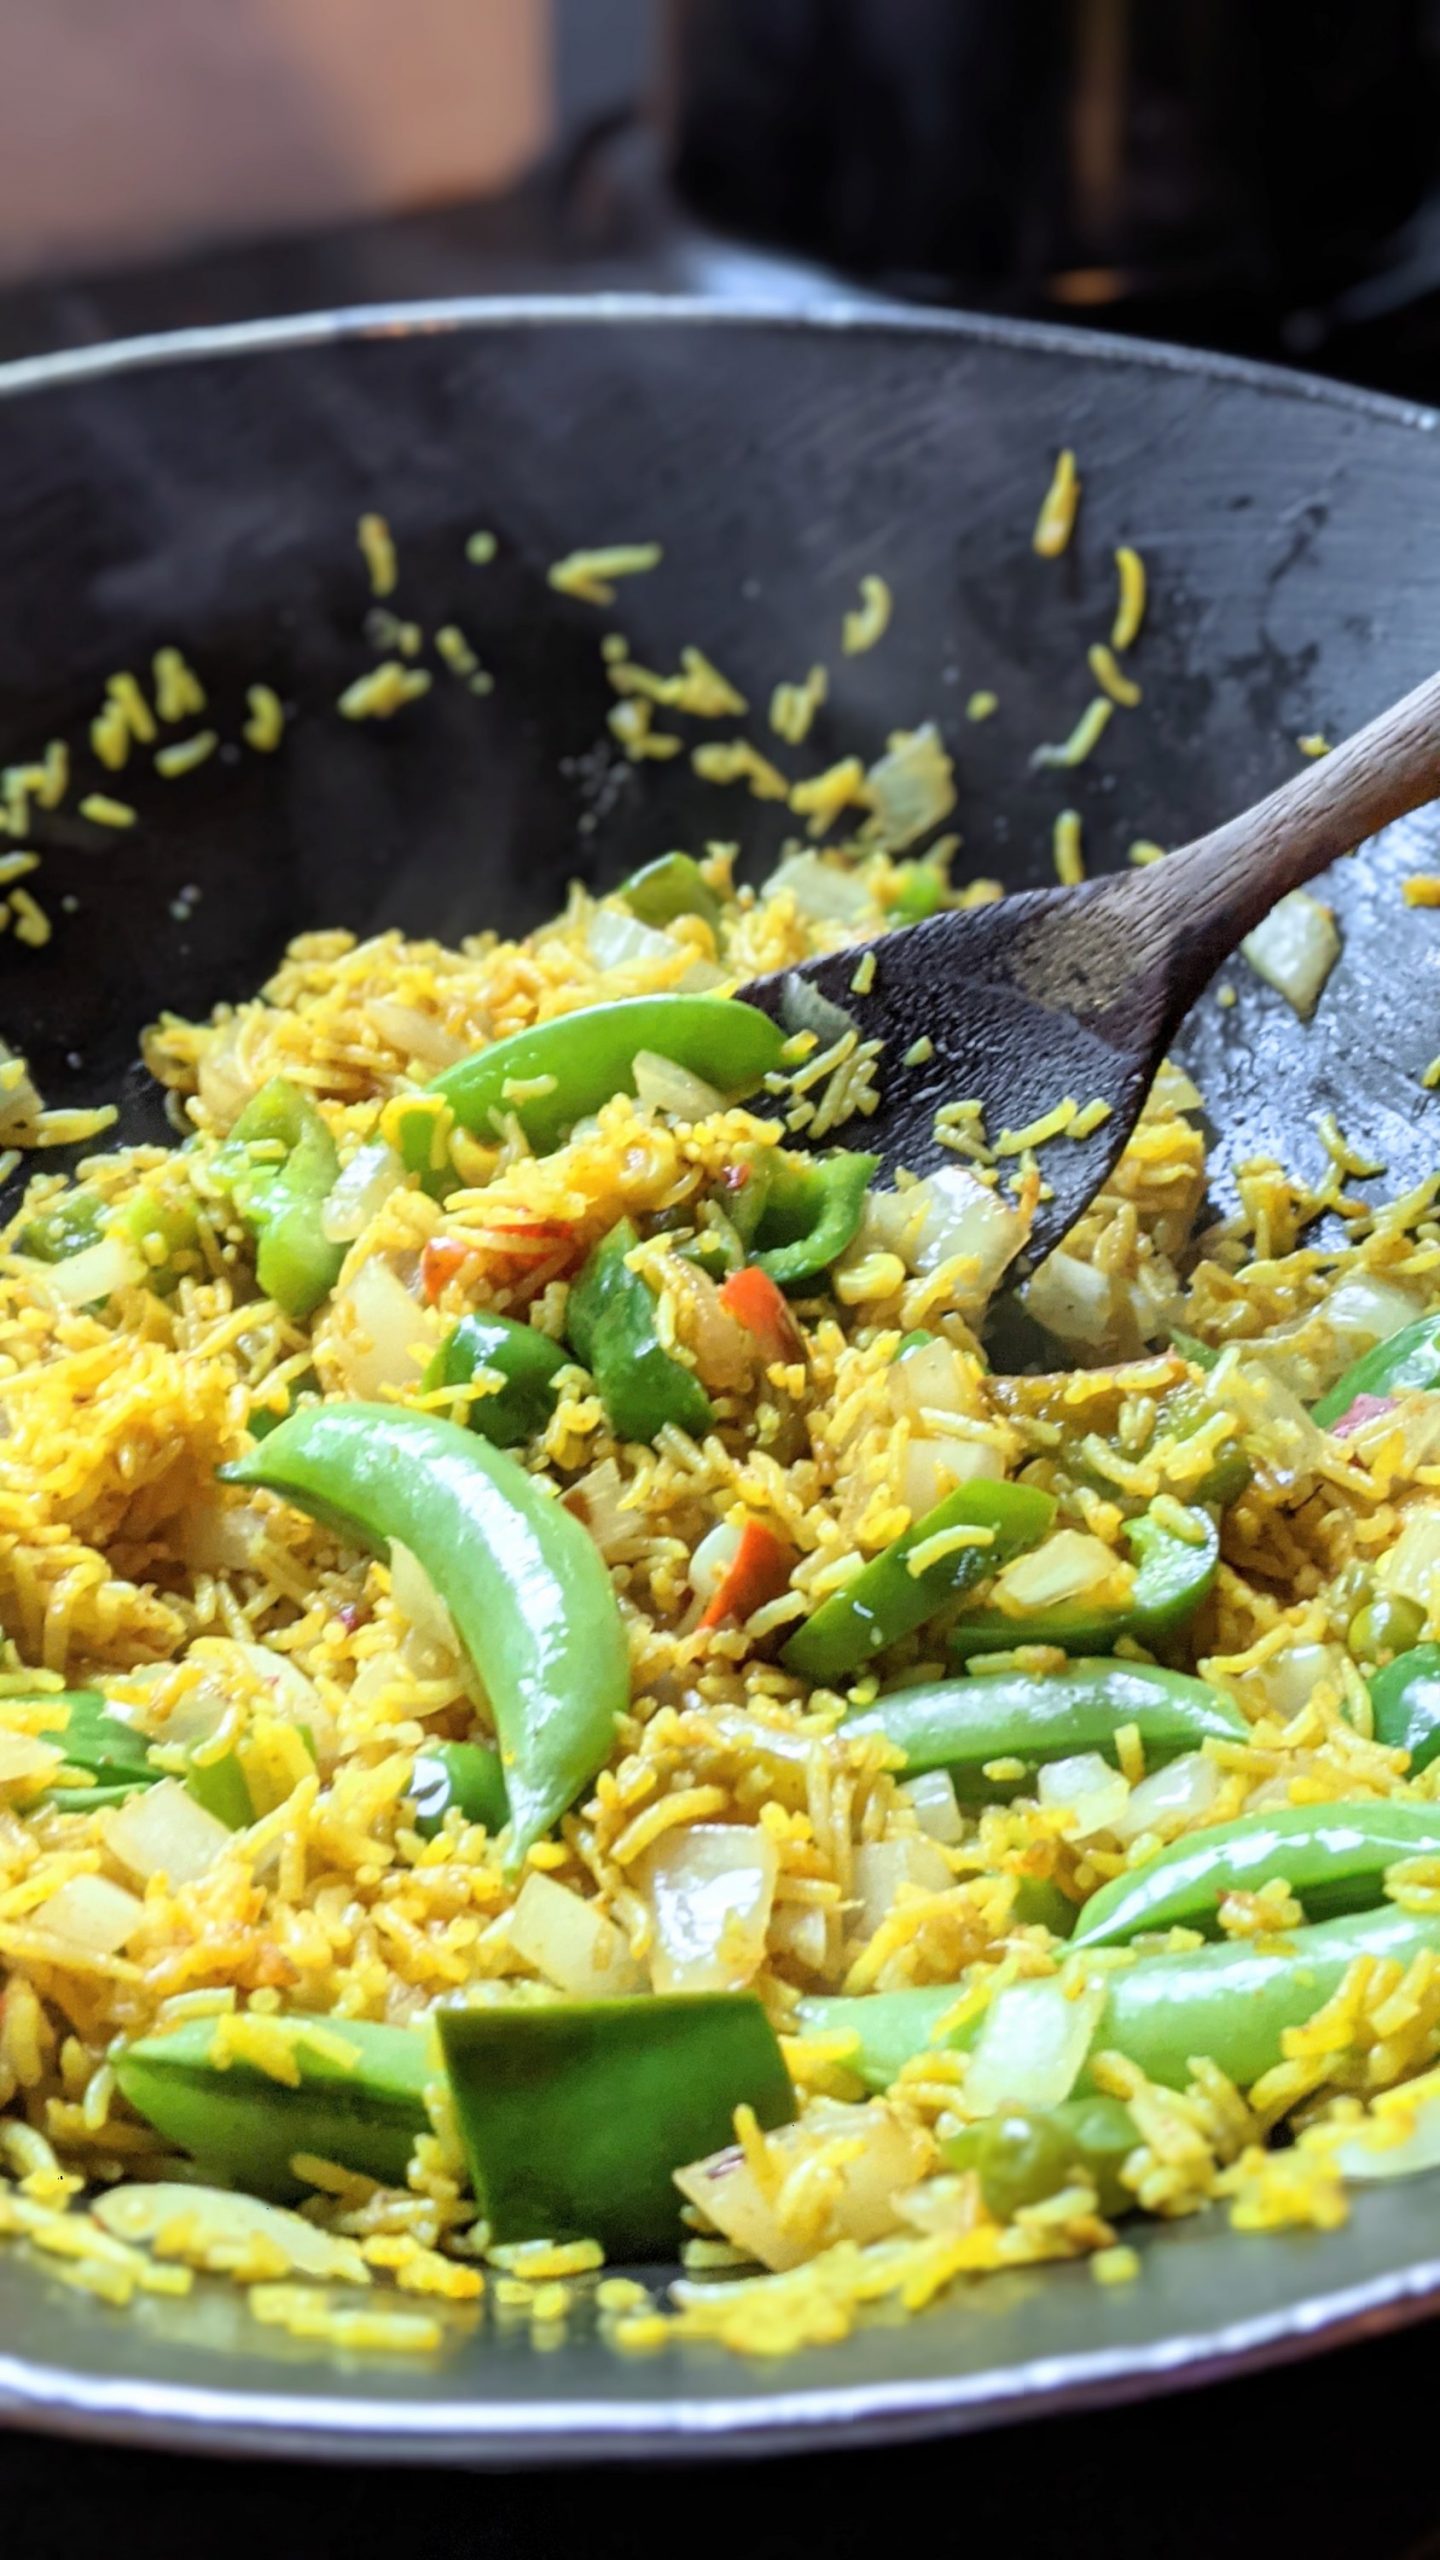 fried rice with snap peas healthy leftover rice dinner ideas how to eat leftover rice recipes gluten free vegan fried rice with peas